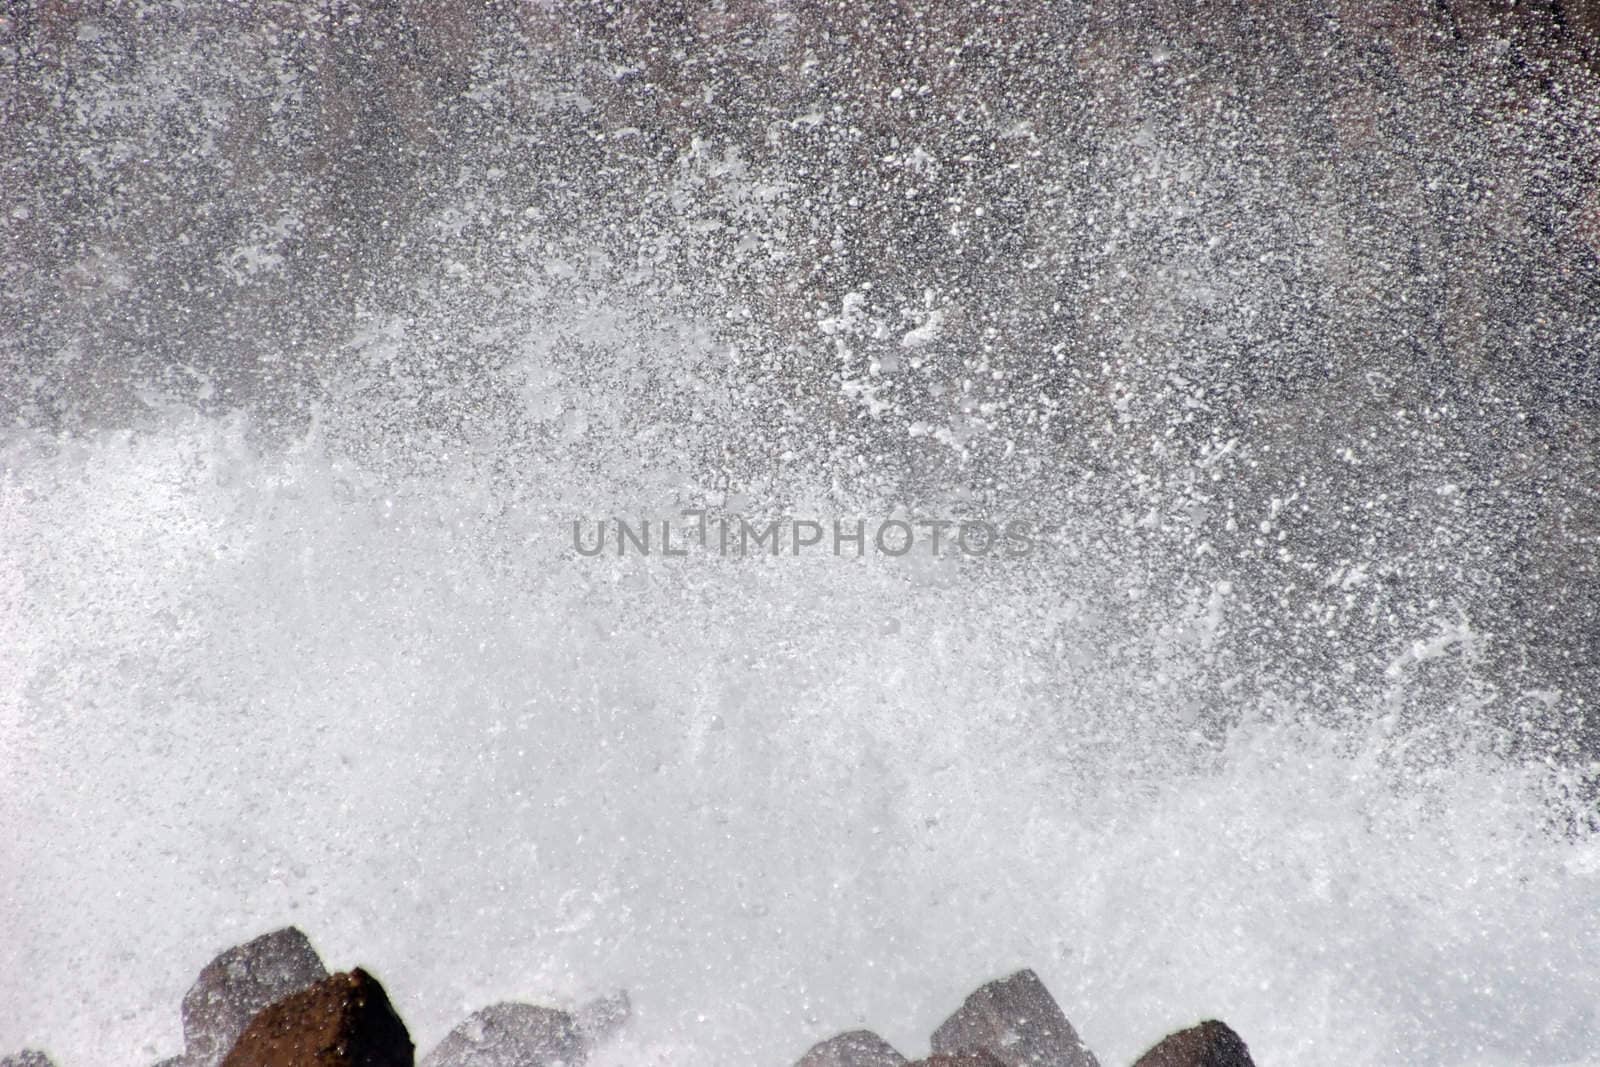 Spray from wave hitting the shore by azotov